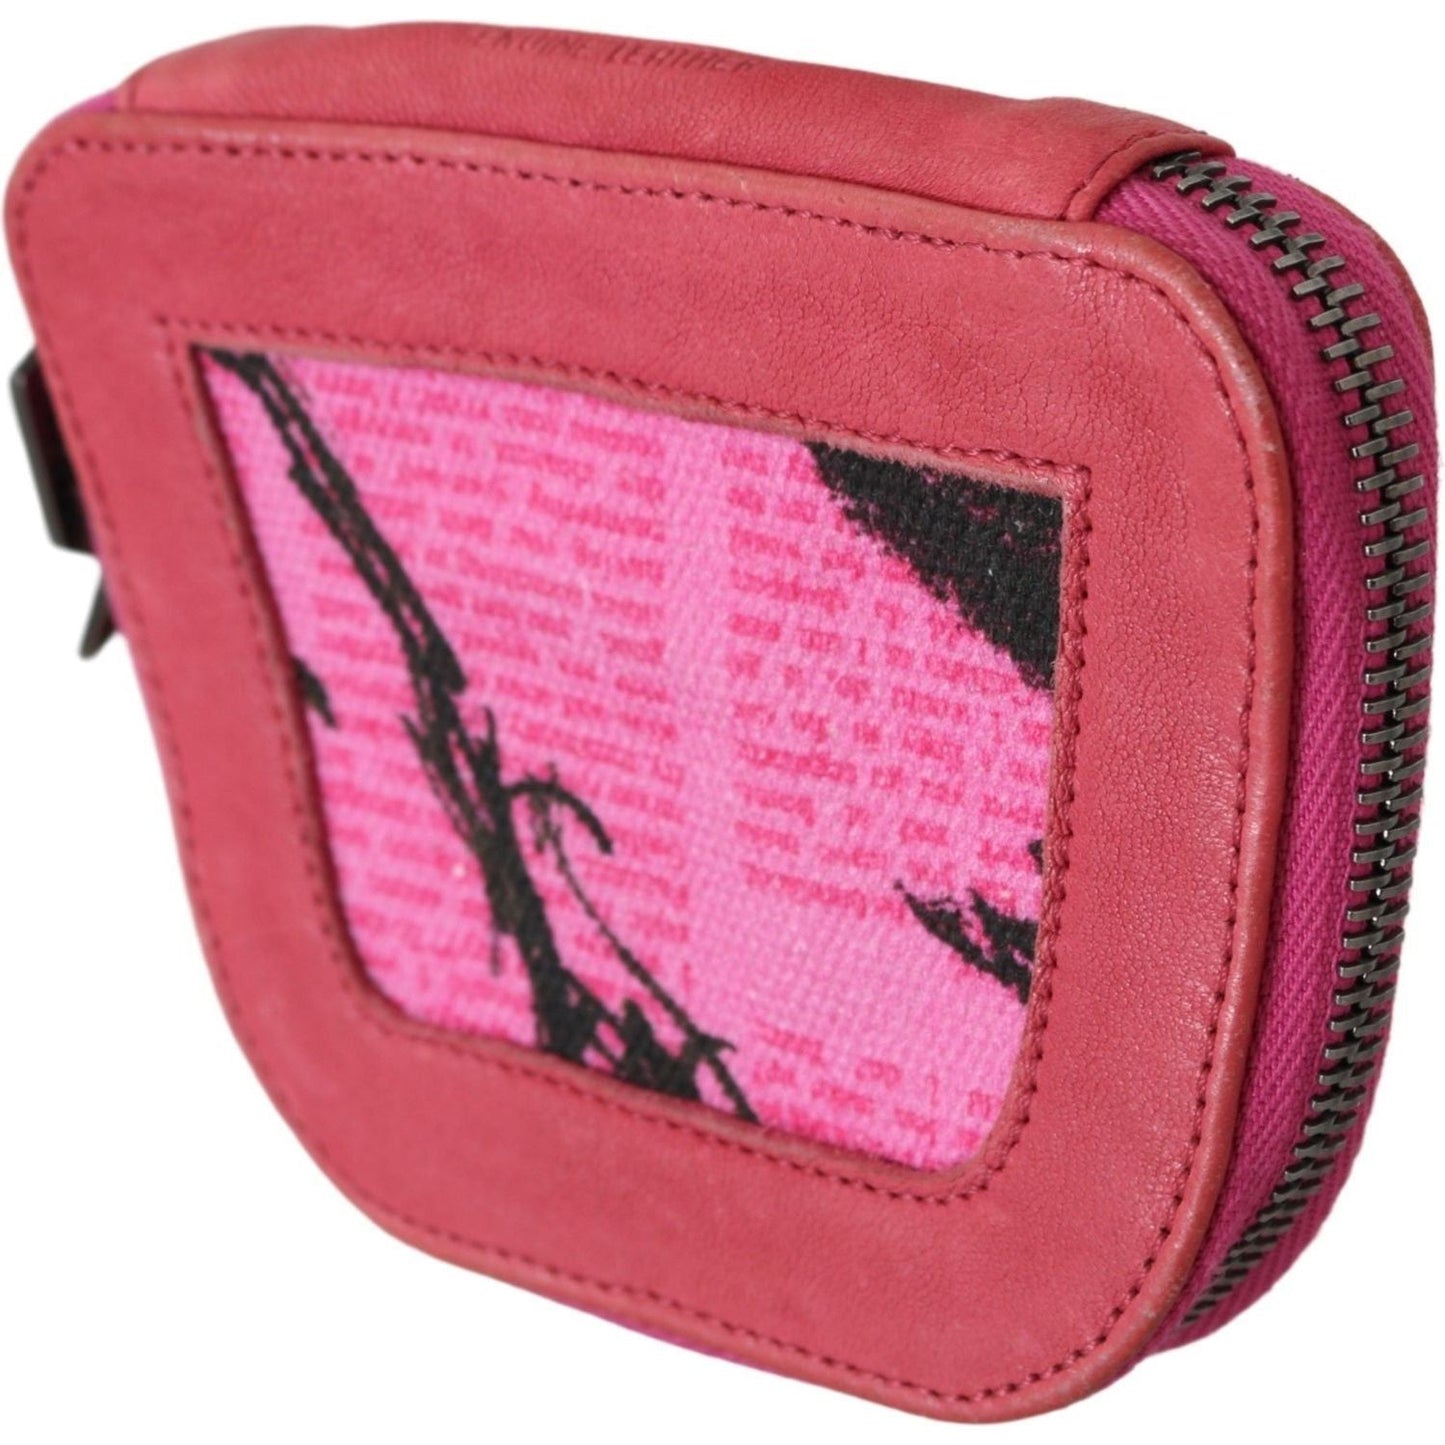 PINKO Elegant Pink Fabric Coin Wallet Purse pink-suede-printed-coin-holder-women-fabric-zippered-purse IMG_0182-231f49a7-3fd.jpg